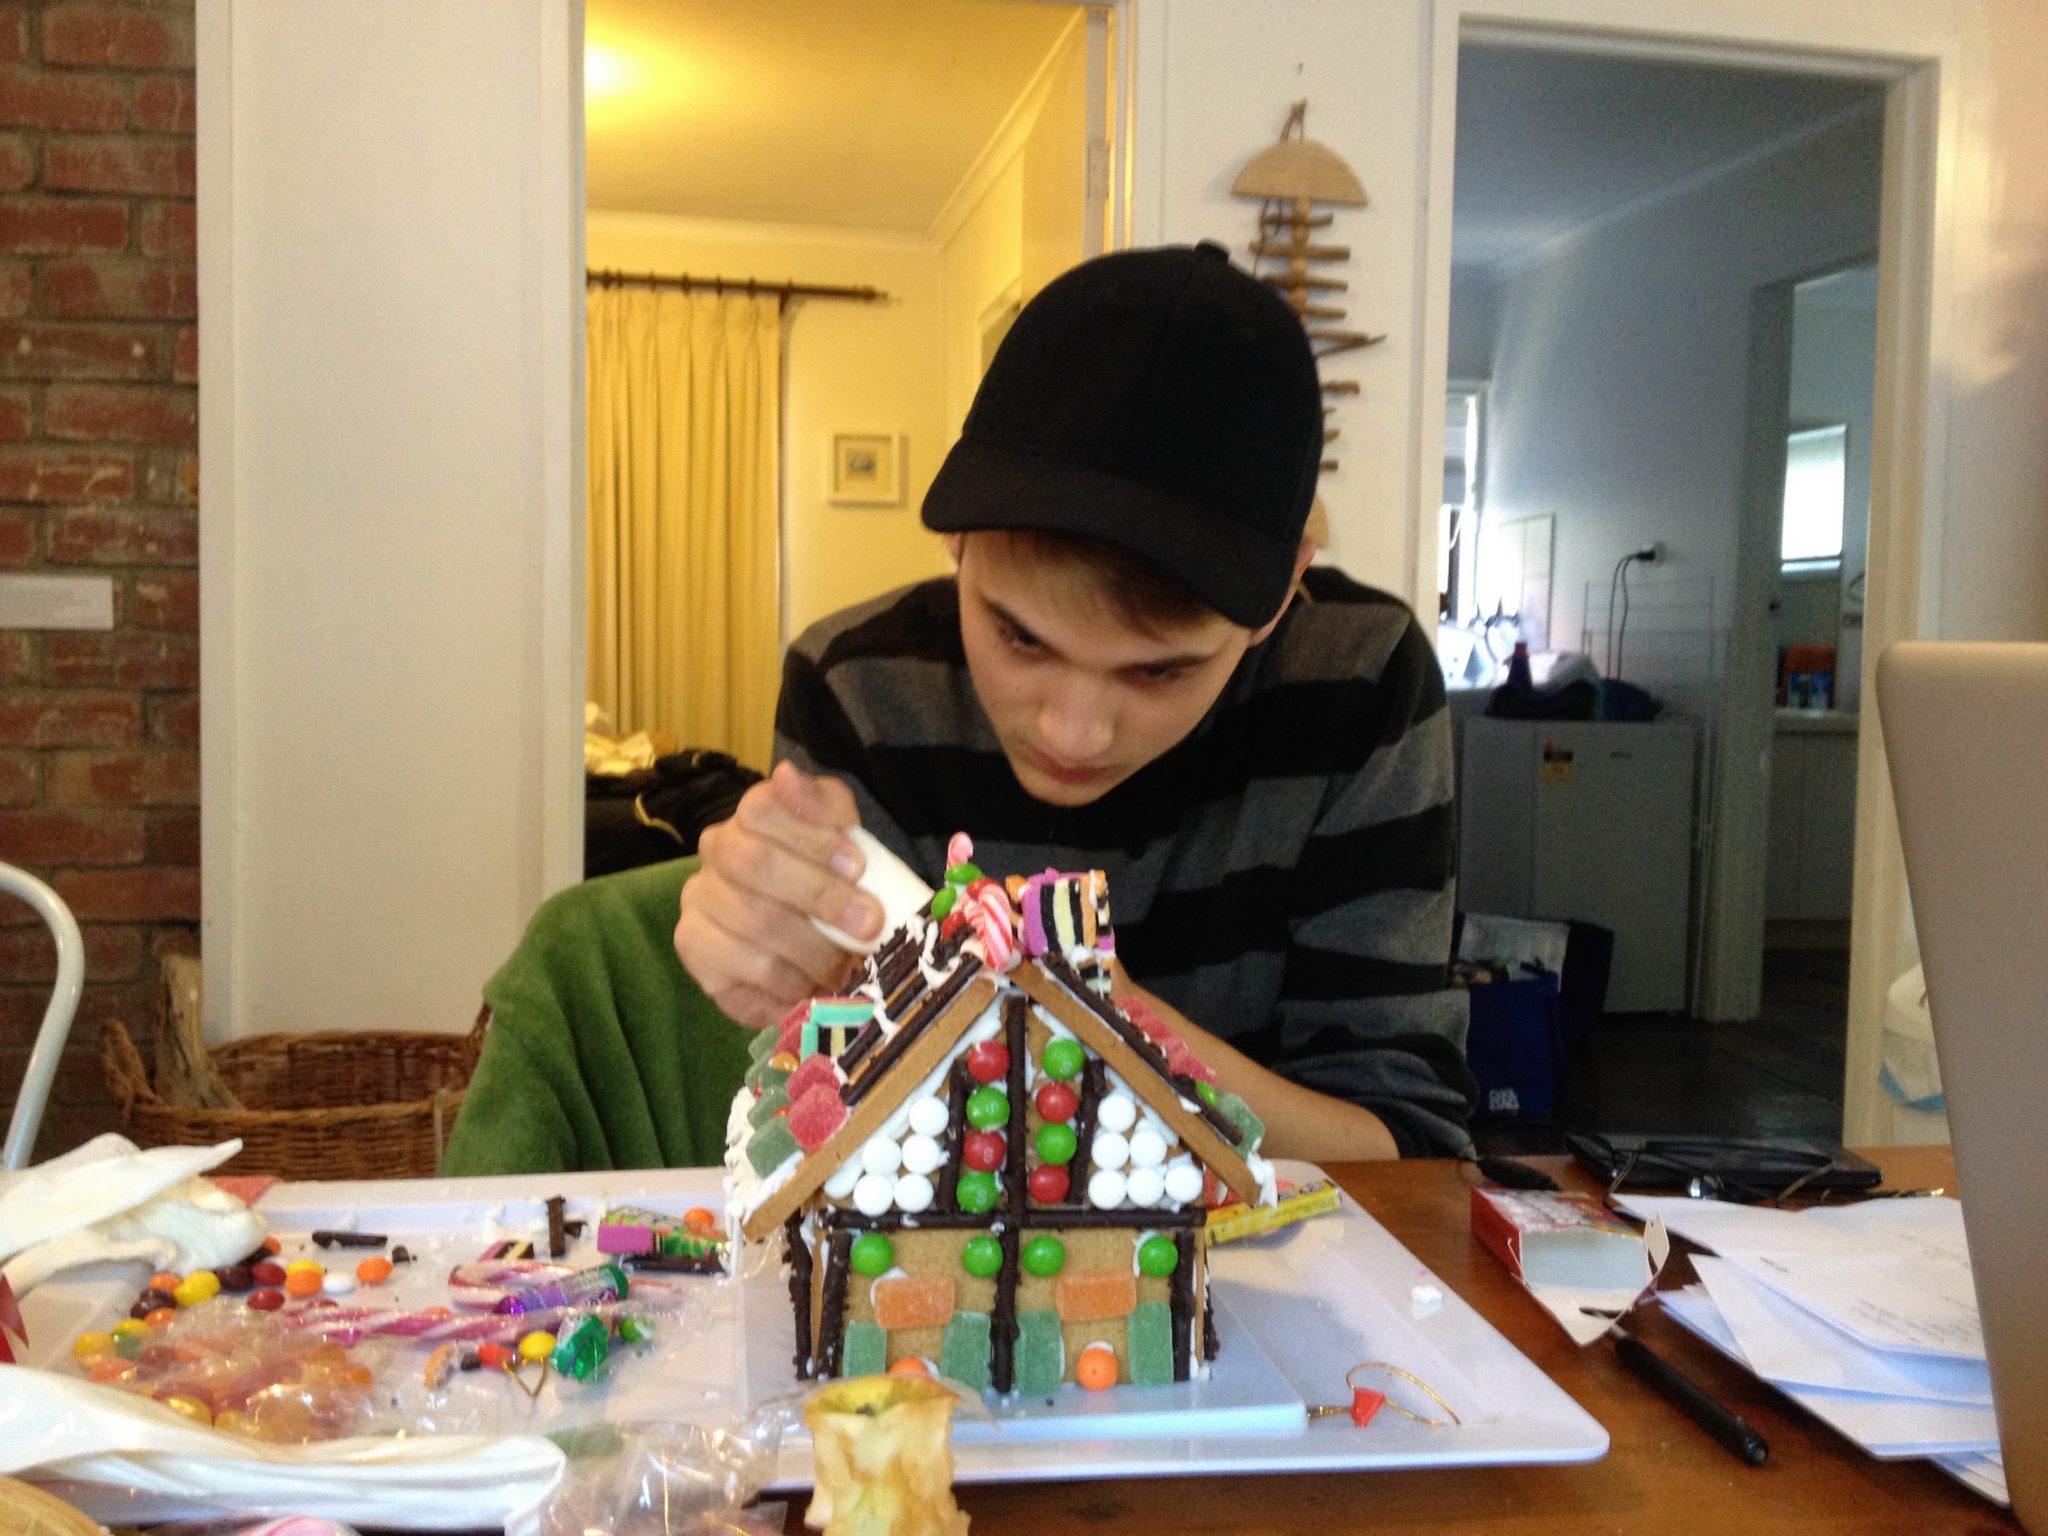 125. Seventeen year old Josh making the gingerbread house he graceously gave to residents of an elder care facility on Phillip Island, Australia copy